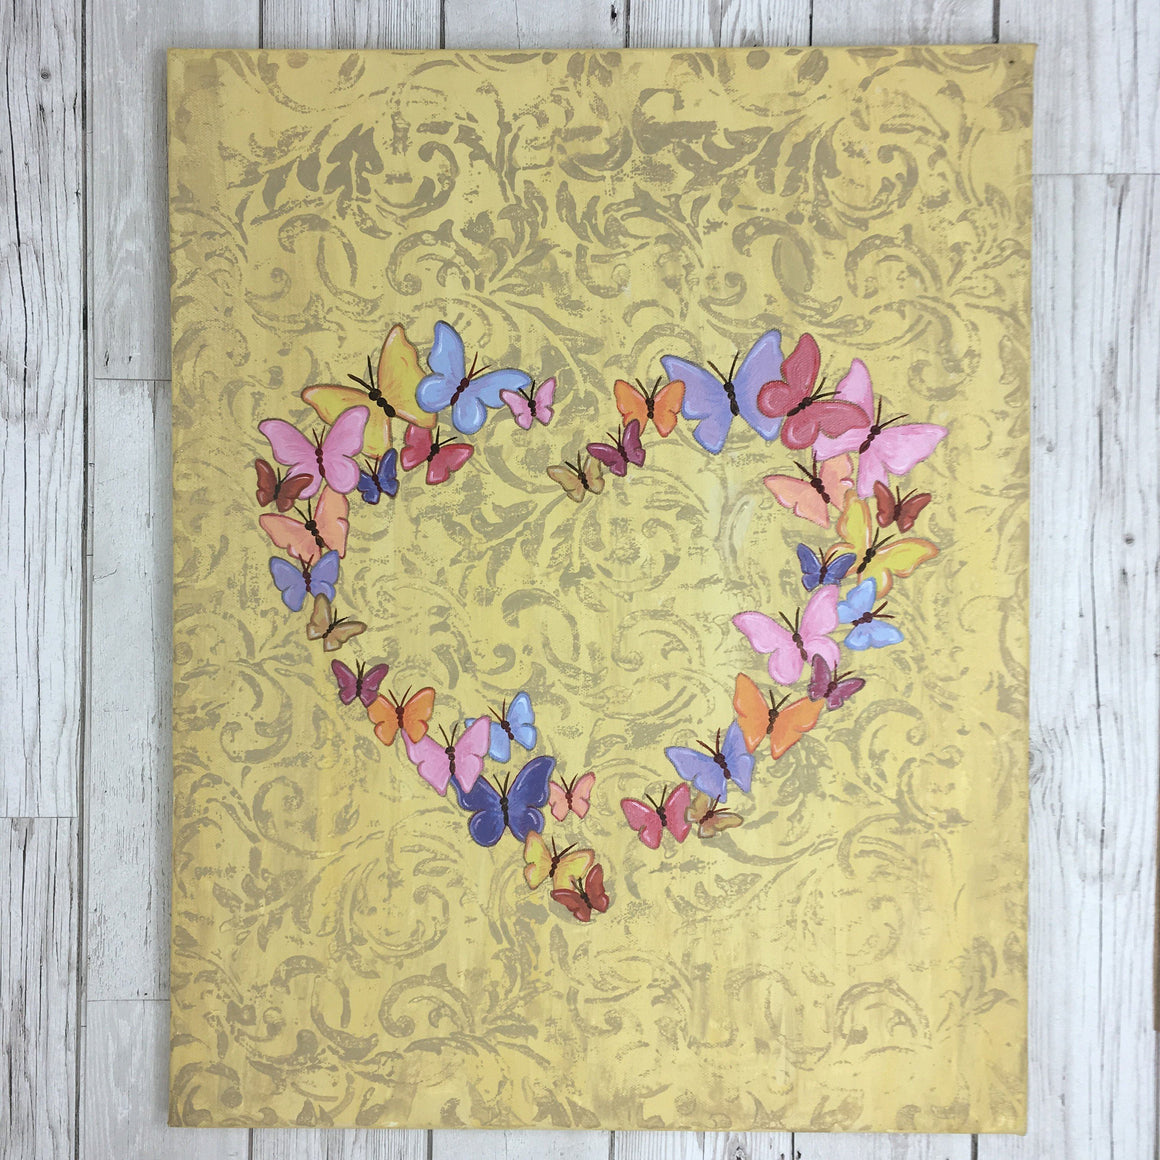 Butterfly Hearts Painting Original Artwork